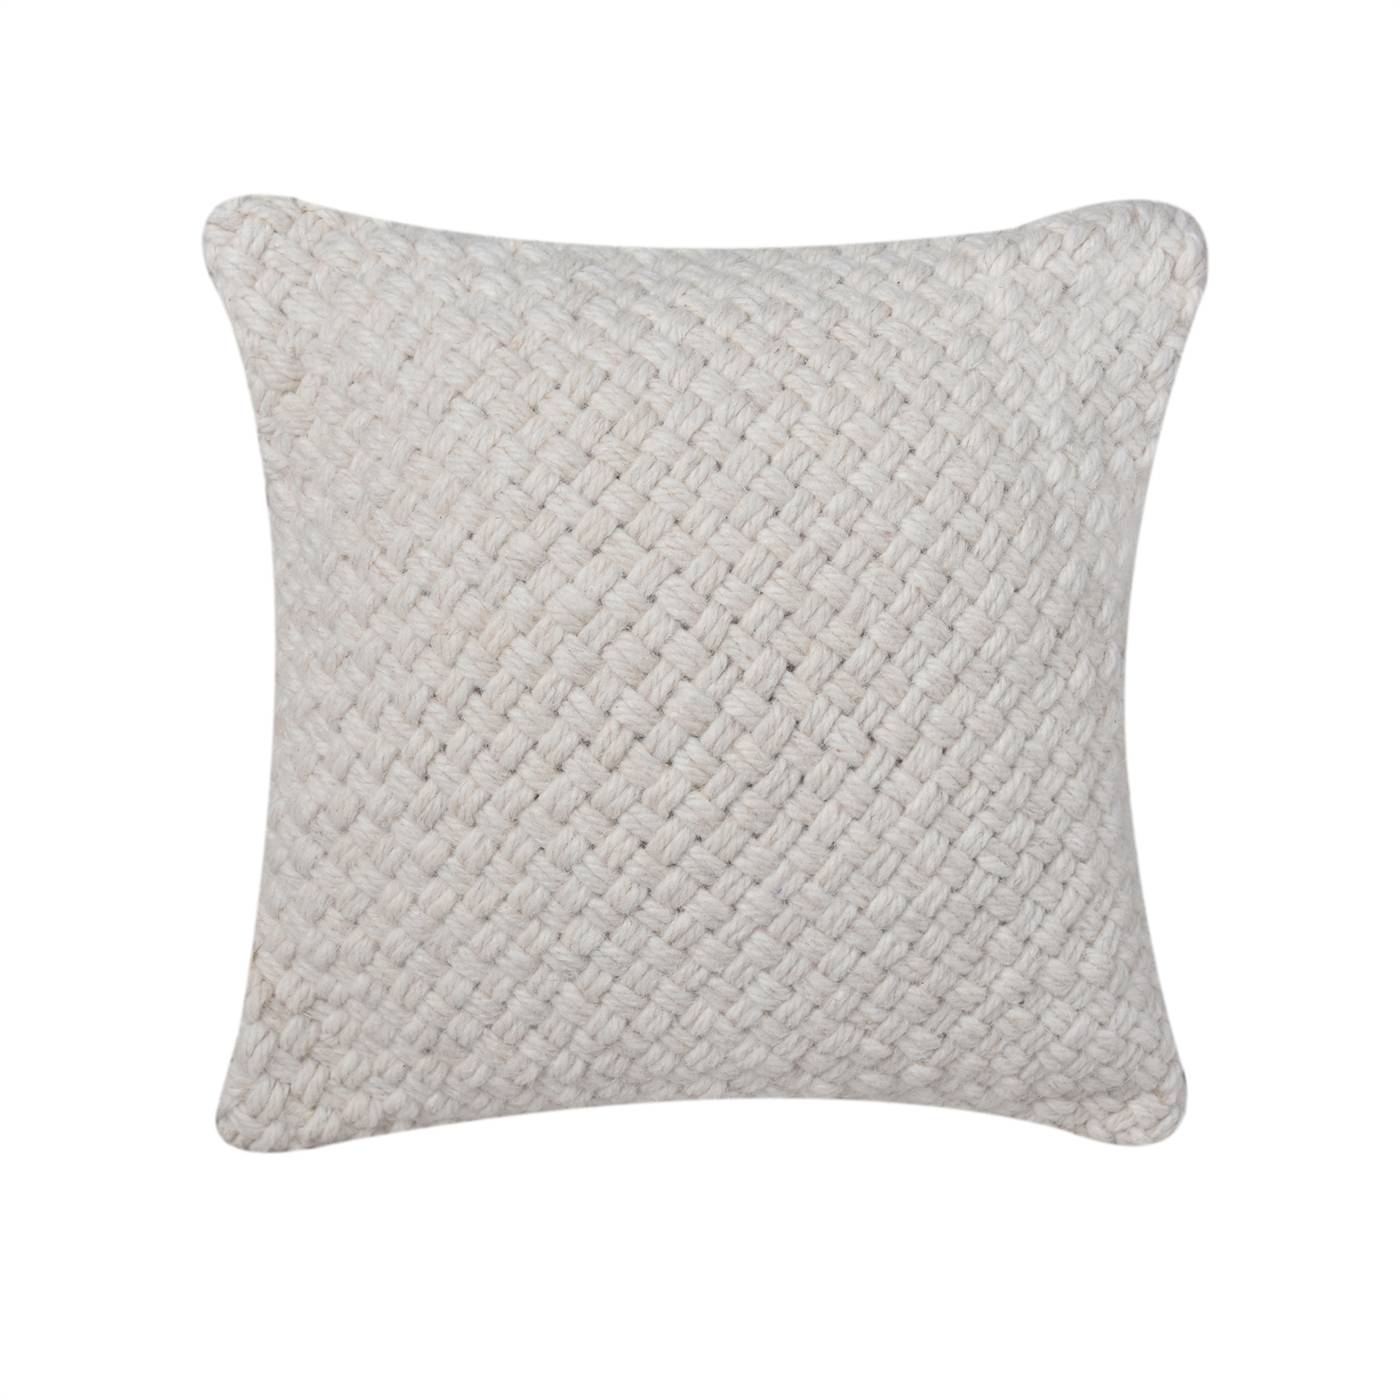 Ainez Cushion, 45x45 cm, Natural White, Wool, Hand Knitted, Hm Knitted, Flat Weave